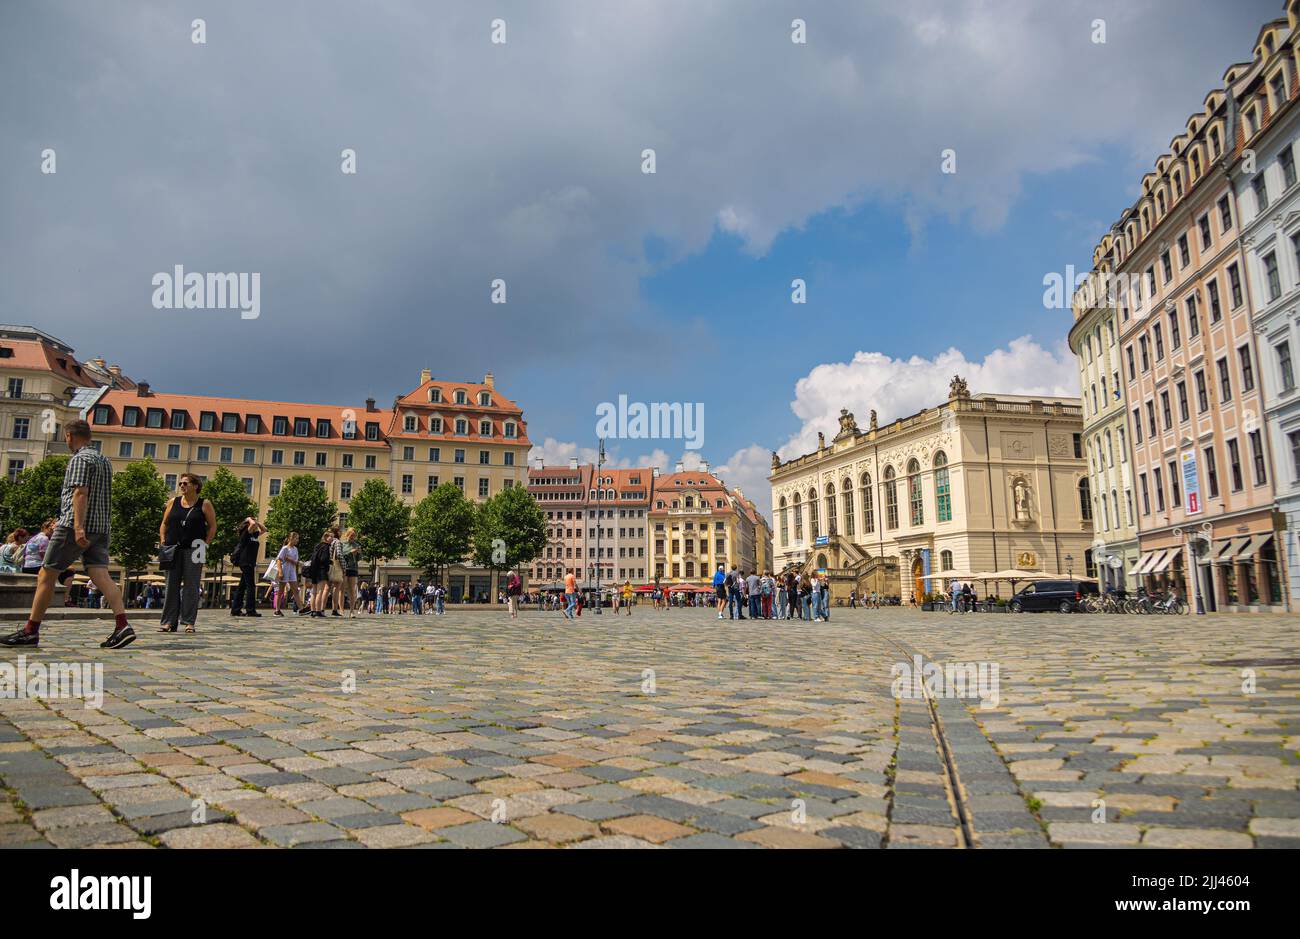 Dresden, Germany - June 28, 2022: The Neumarkt in the old town of Dresden. Low angle view over the square paved with cobblestones,  towards the Transp Stock Photo